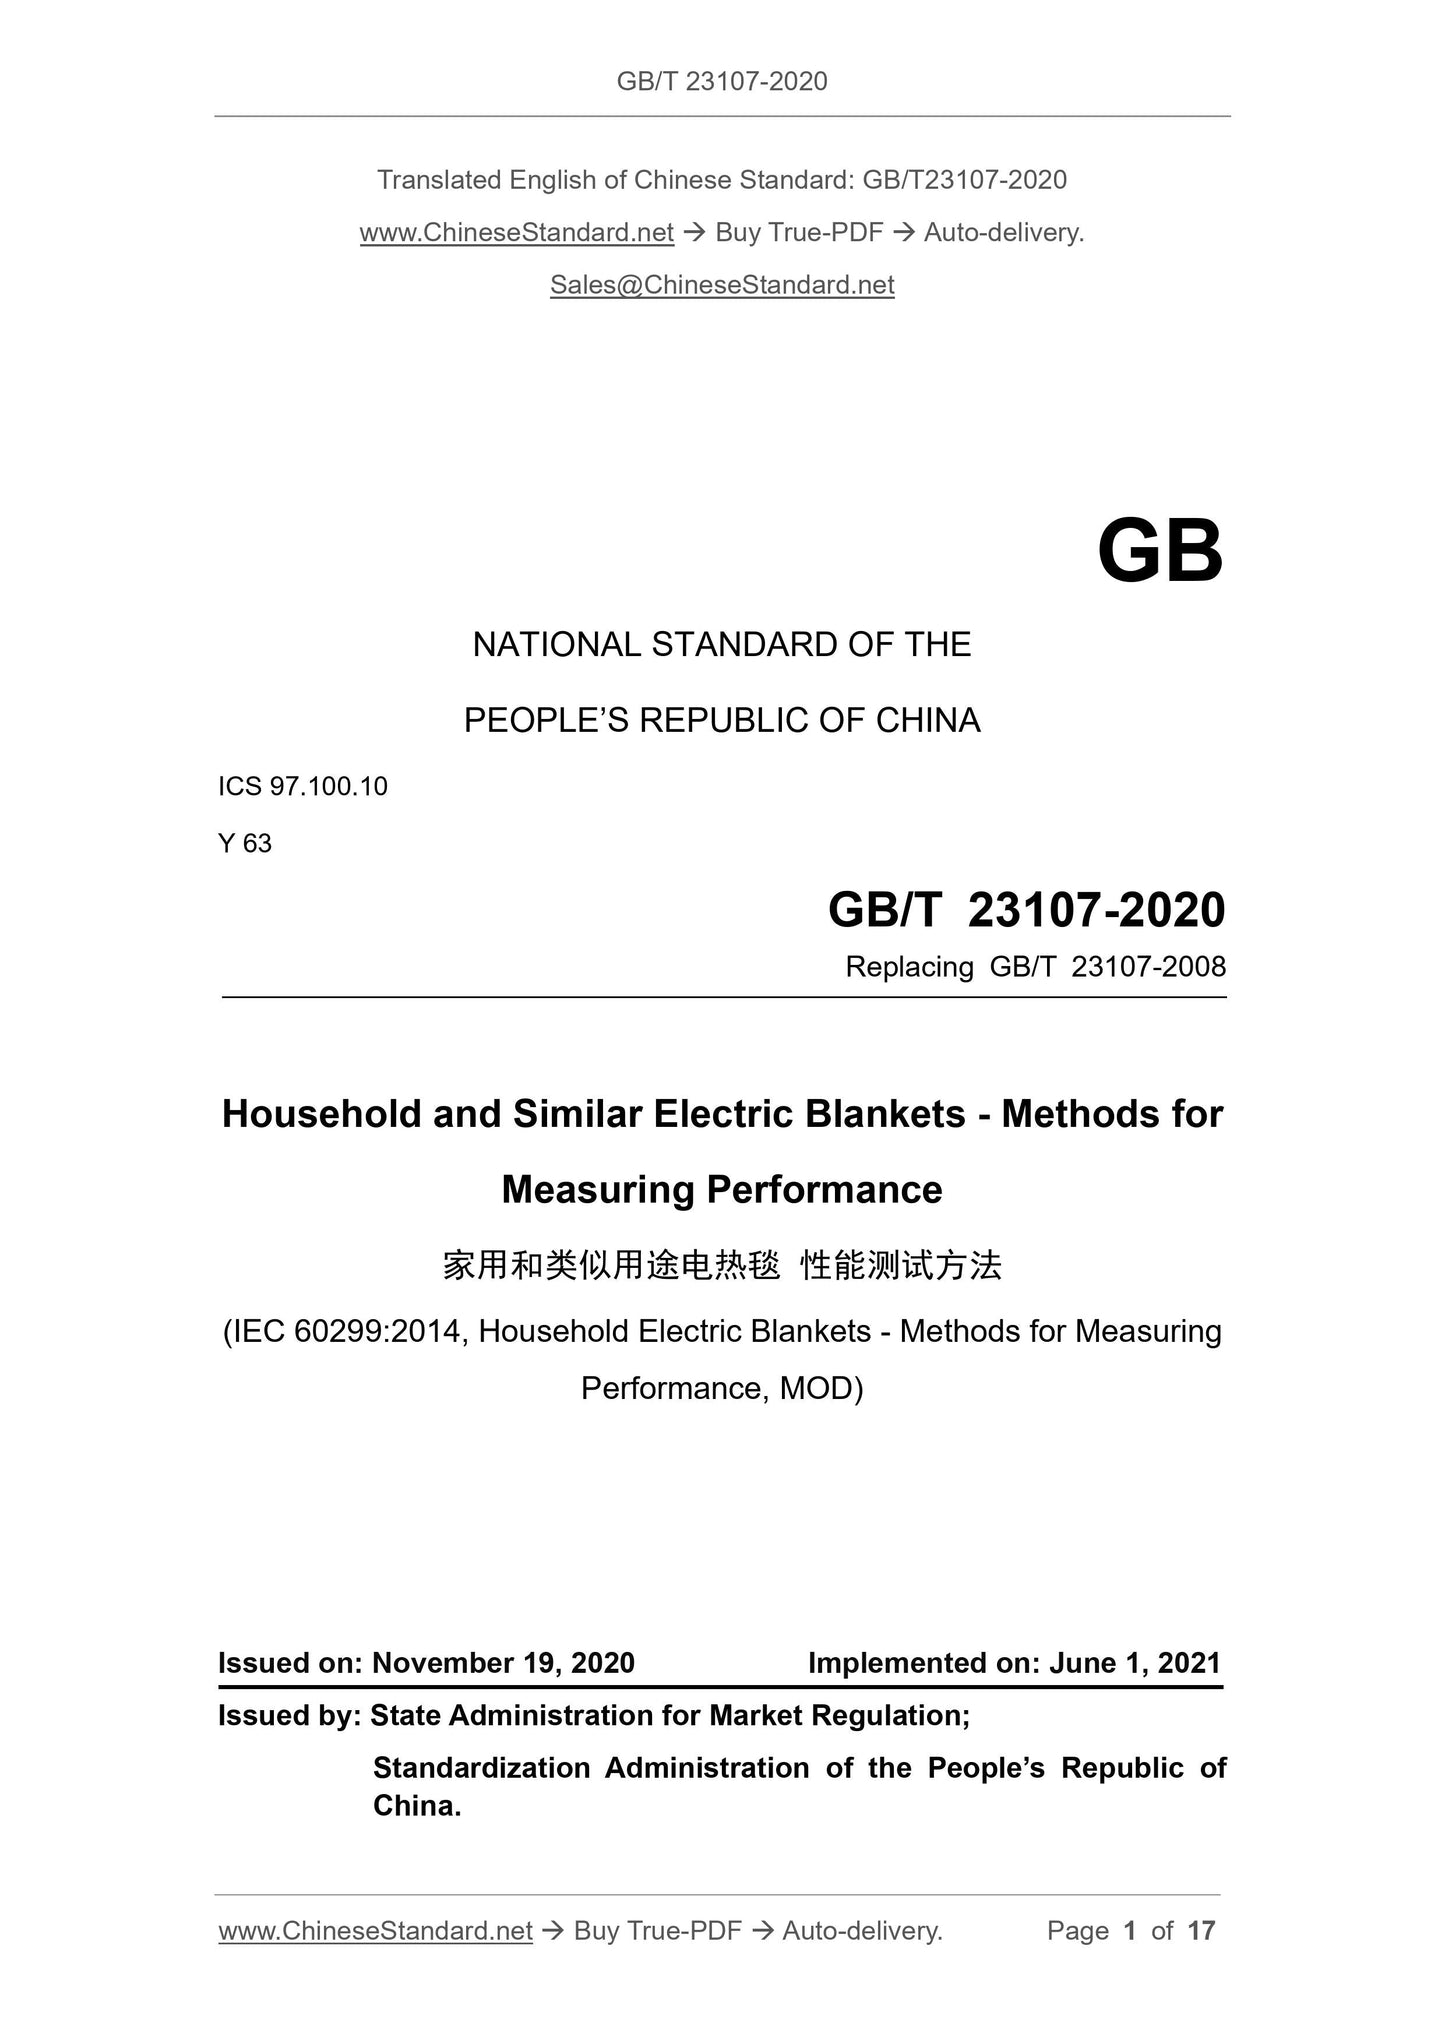 GB/T 23107-2020 Page 1